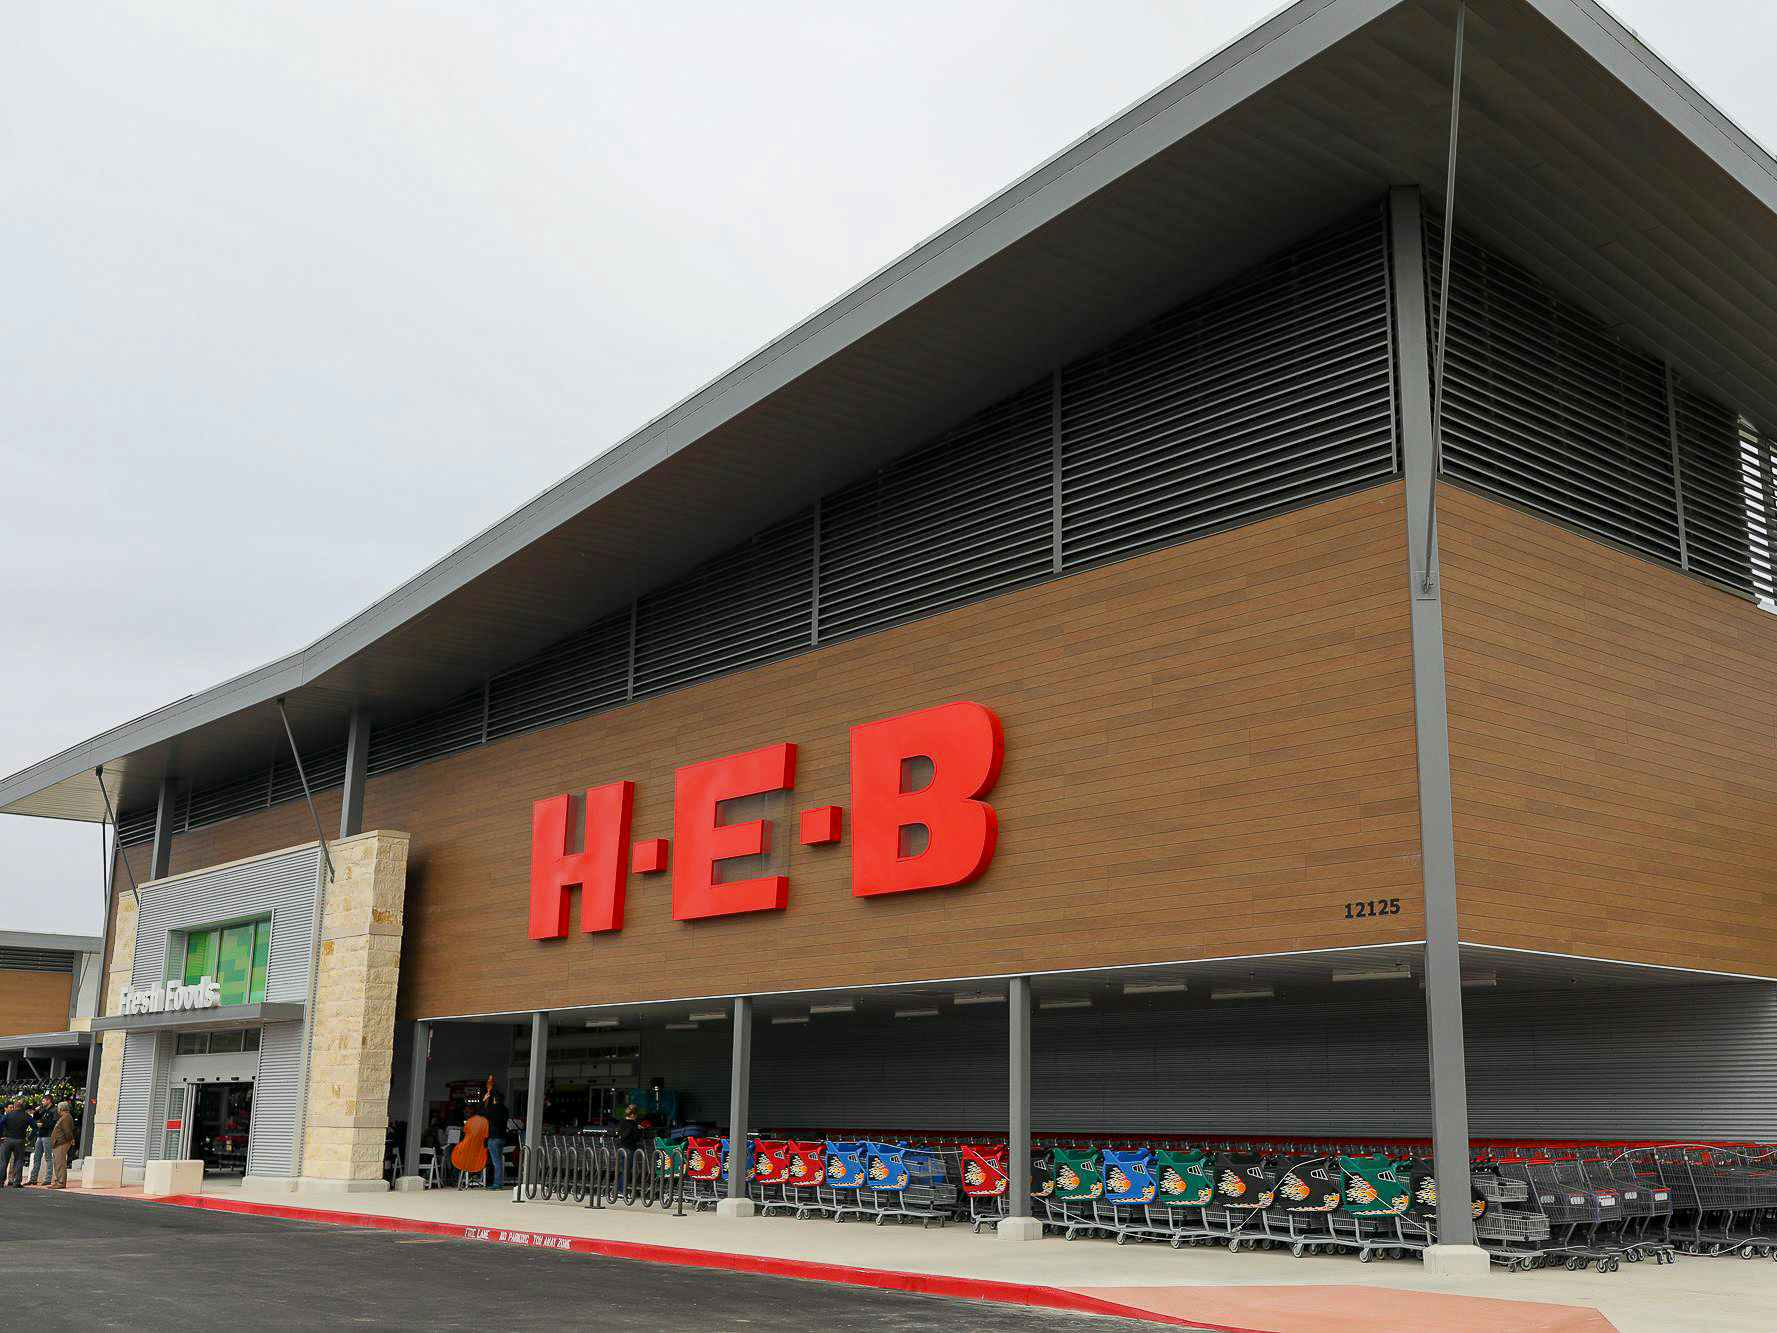 The exterior of an H-E-B store